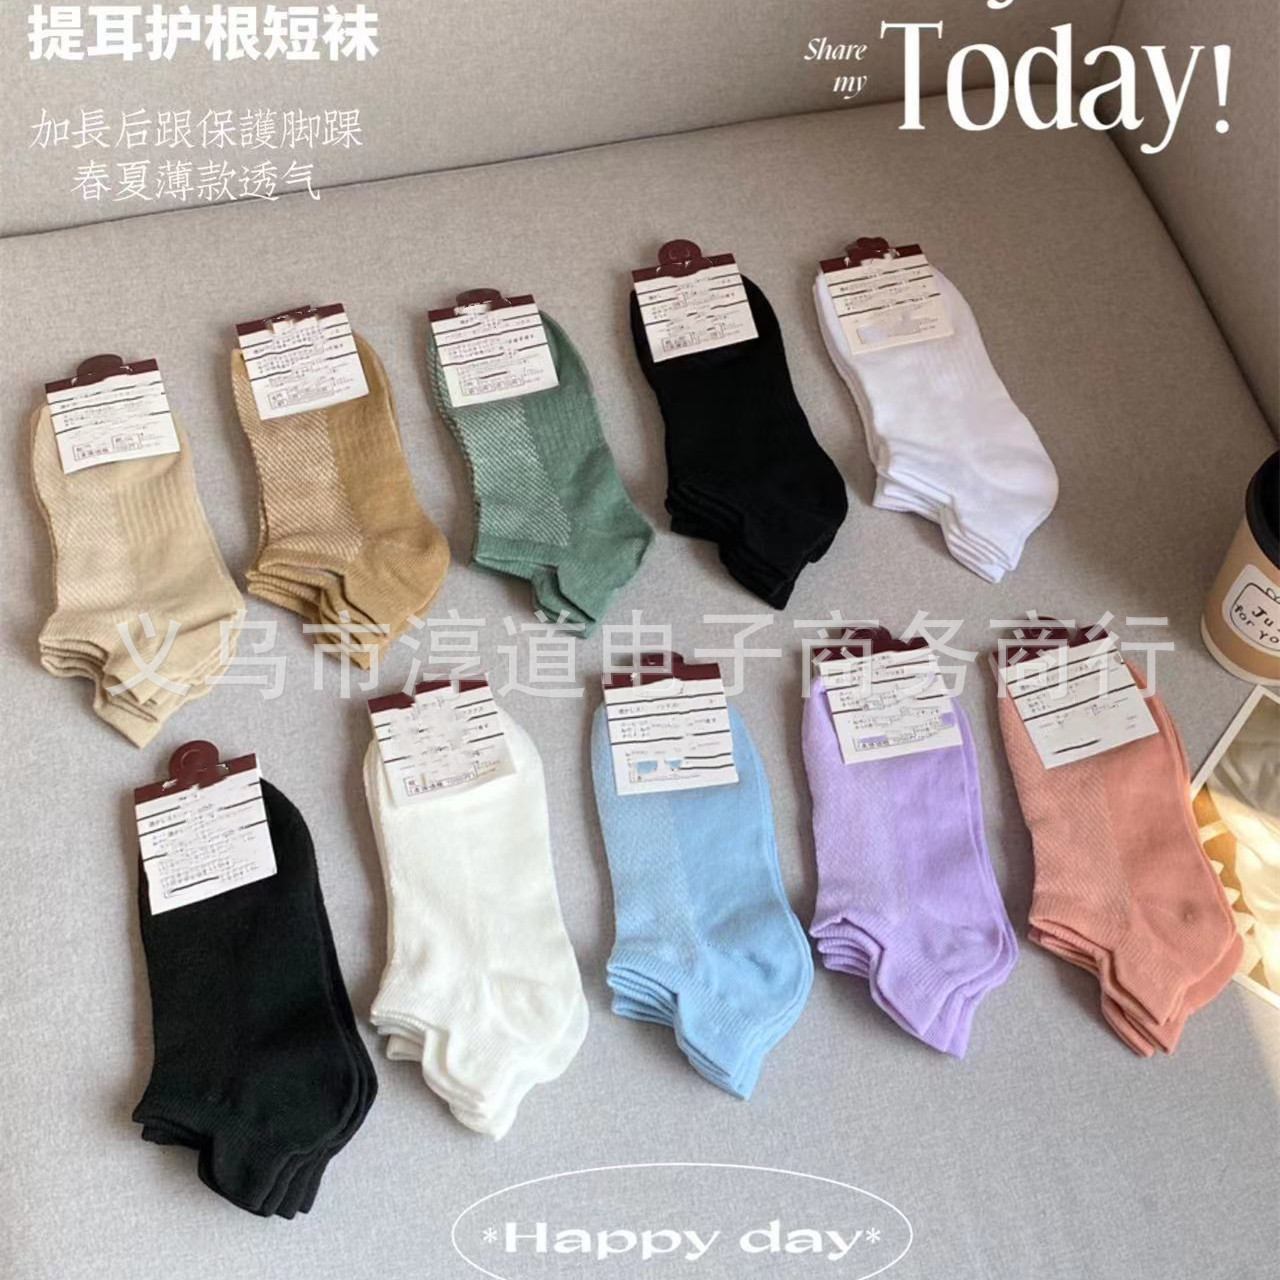 Non-Printed Style Solid Color Couple Mesh Stockings Combed Cotton Men and Women Comfortable Cotton Boat Socks Candy Color Socks Short Tube Boat Socks